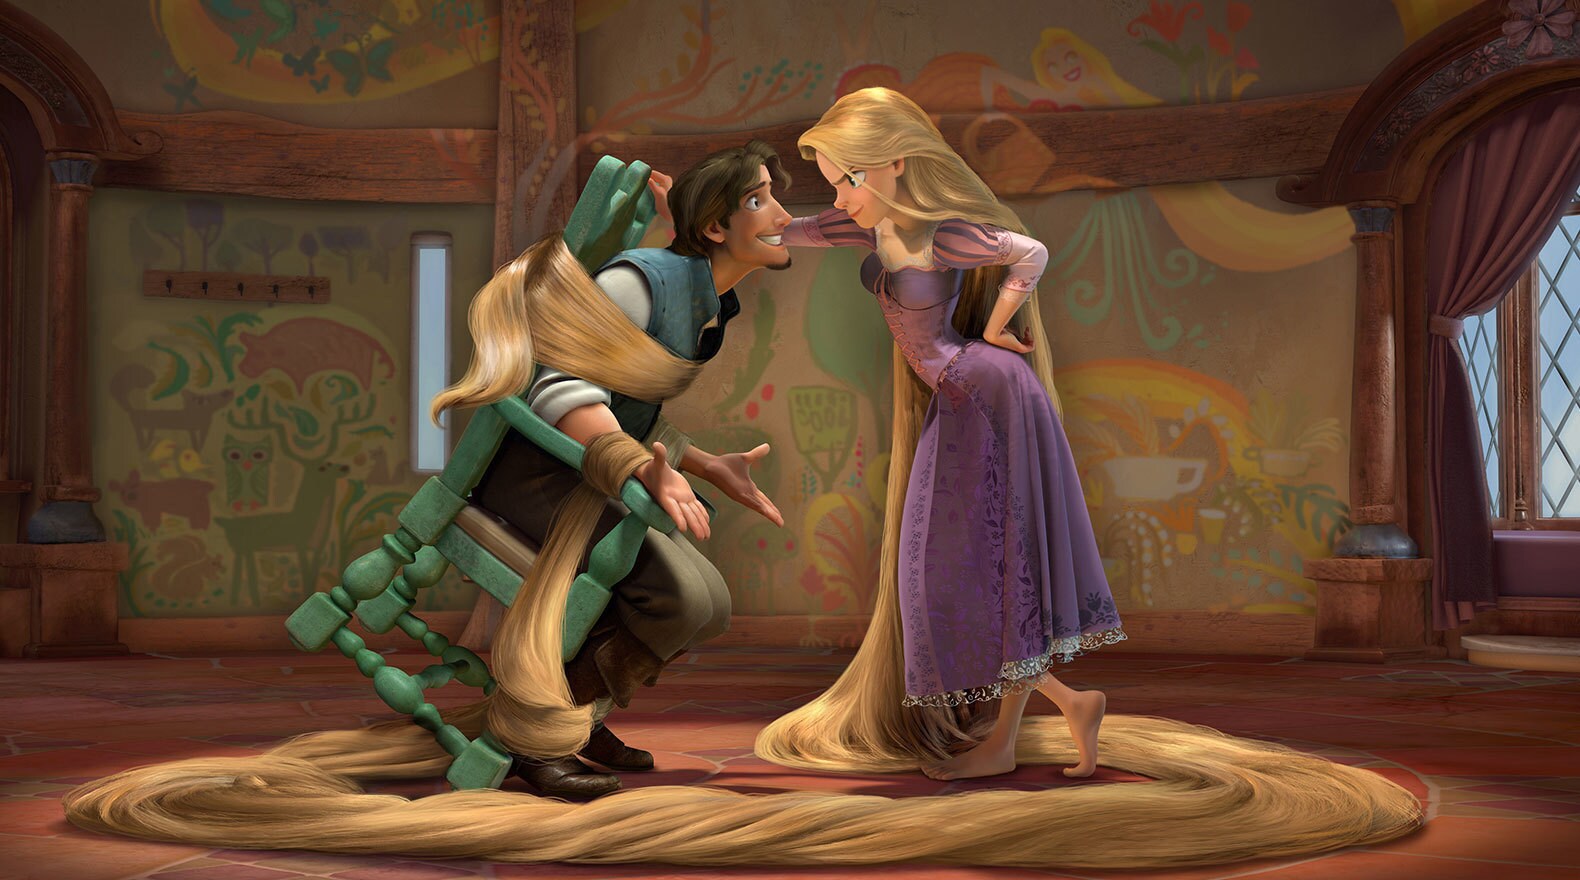 When Flynn Rider surprises Rapunzel in her tower, she has some questions.